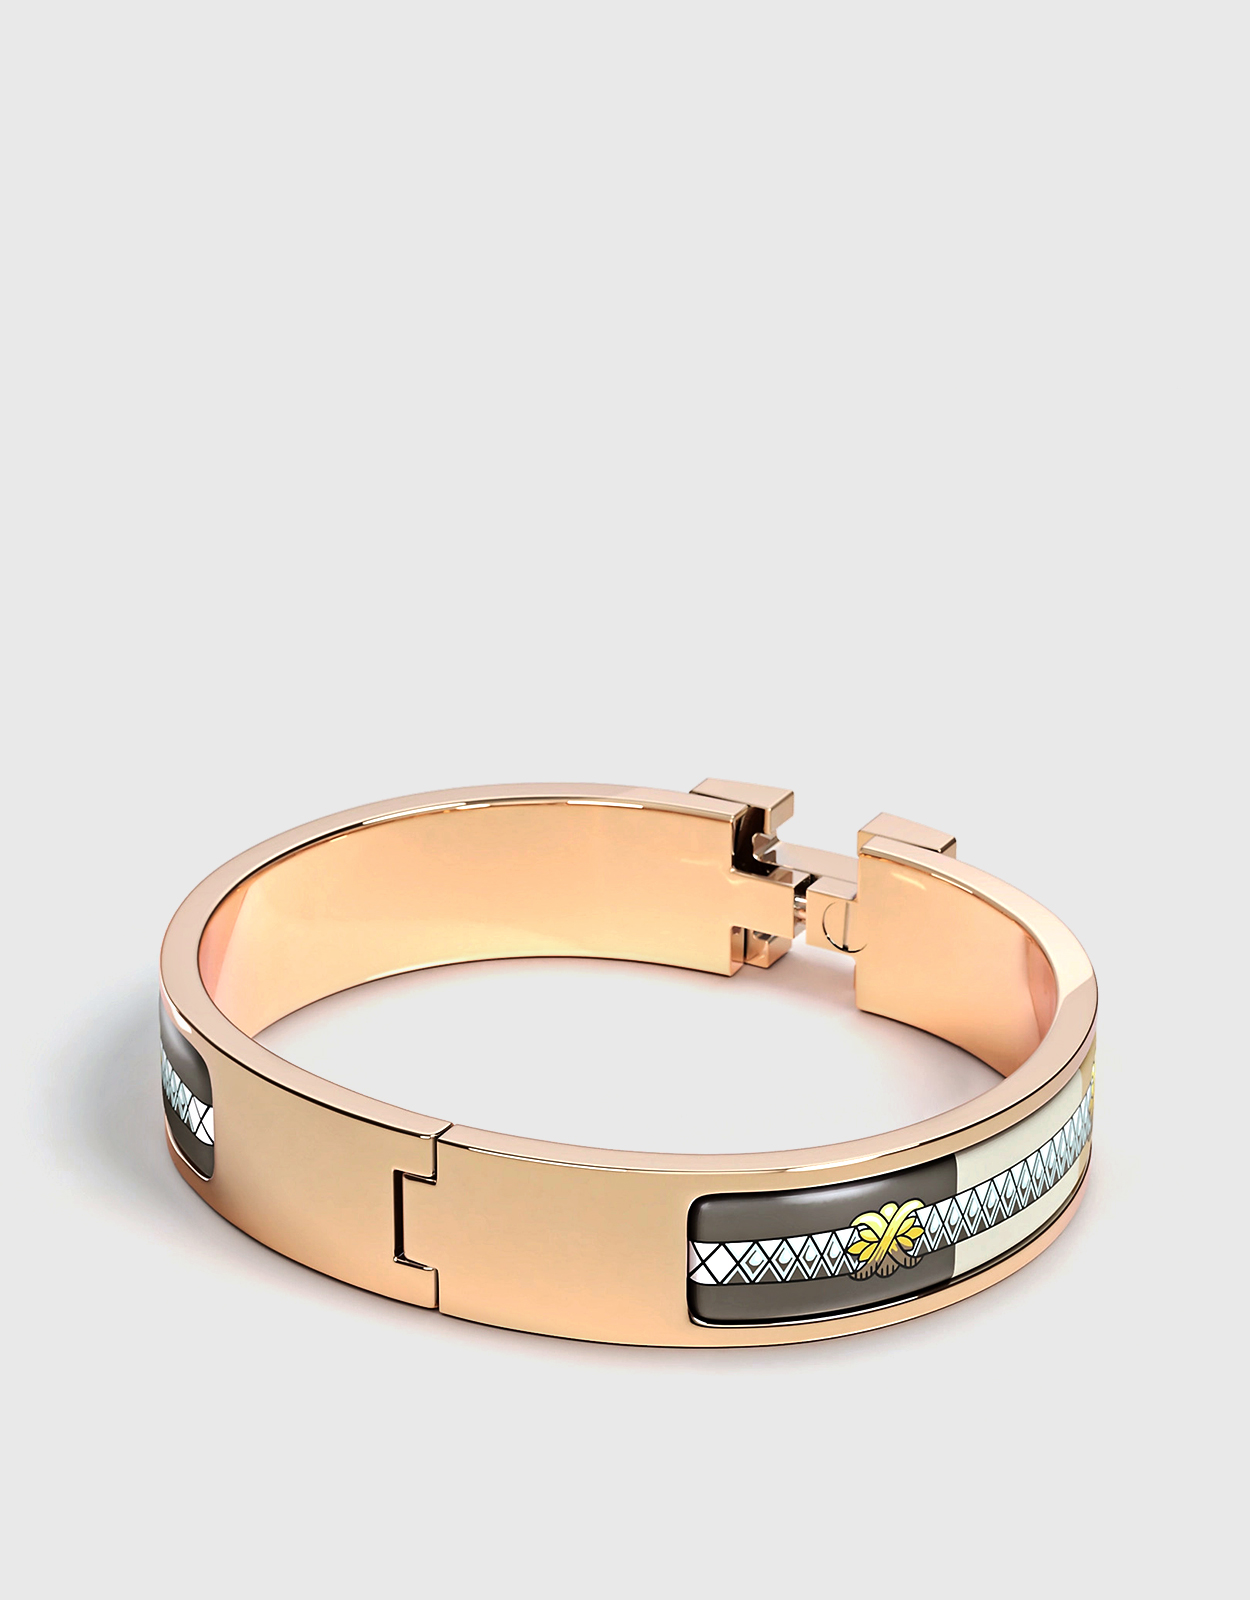 Authentic! Hermes 18k Rose Gold H Open Cuff Bangle Bracelet | Fortrove